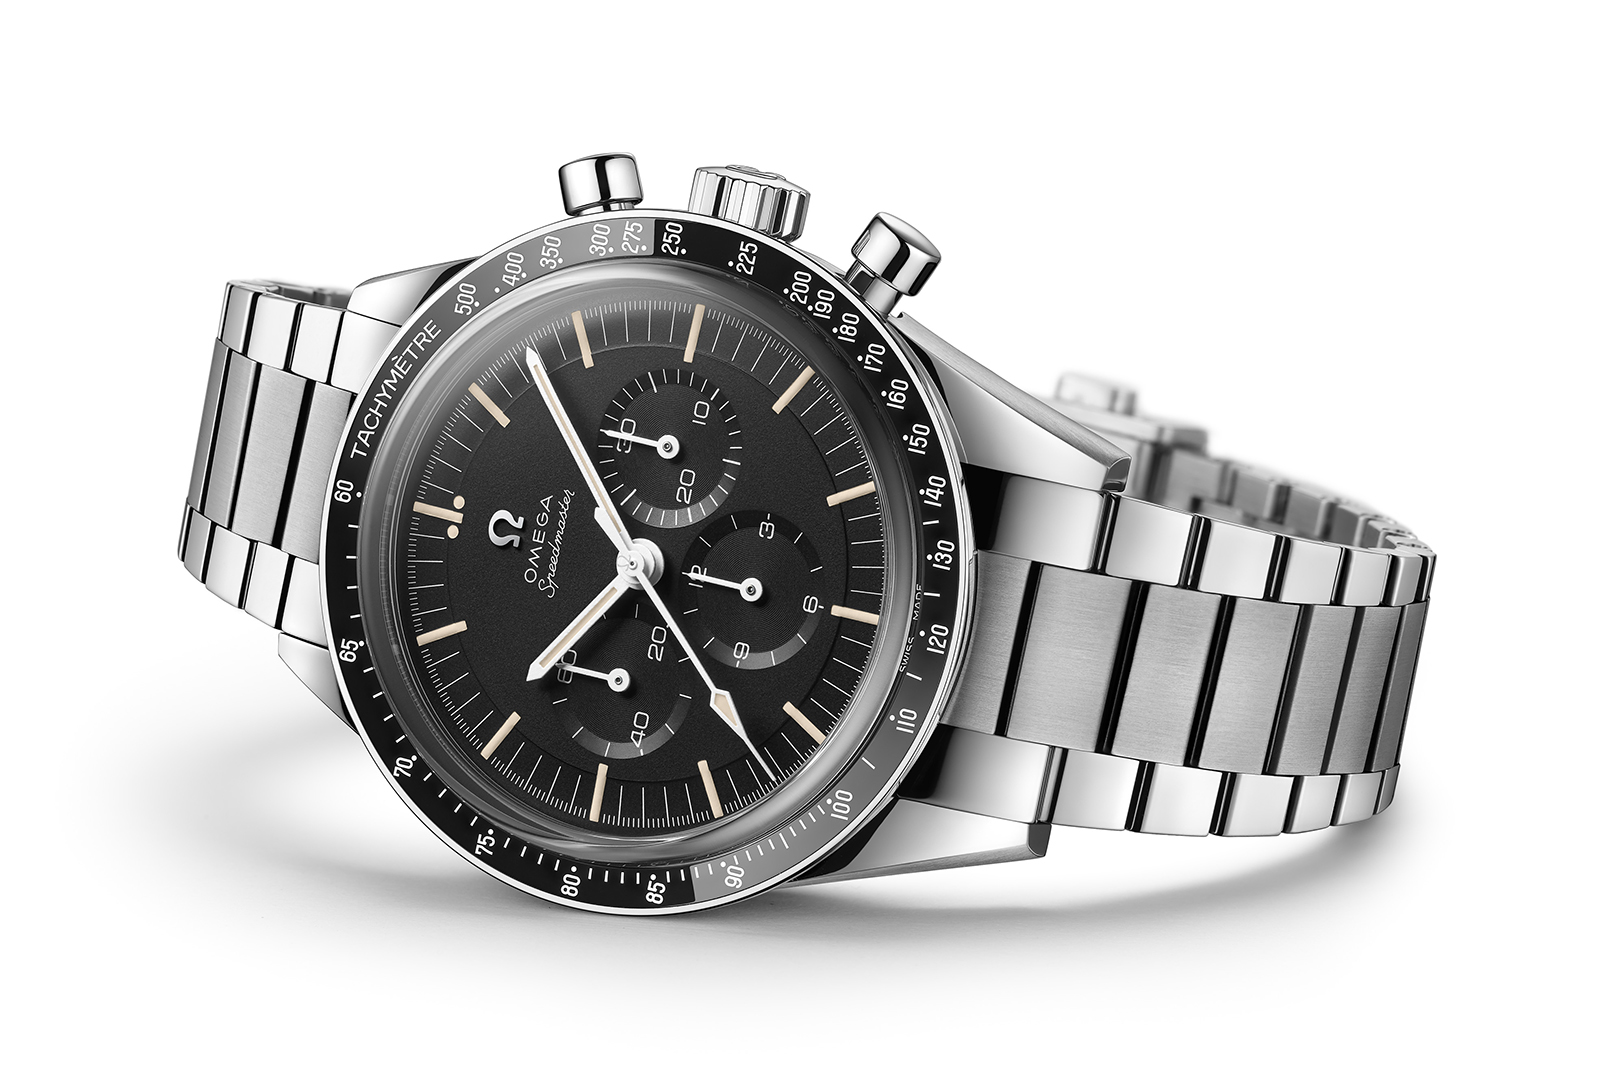 Omega Releases First New Calibre 321 Speedmaster Model In Steel, Referencing The Legendary ‘Ed White’